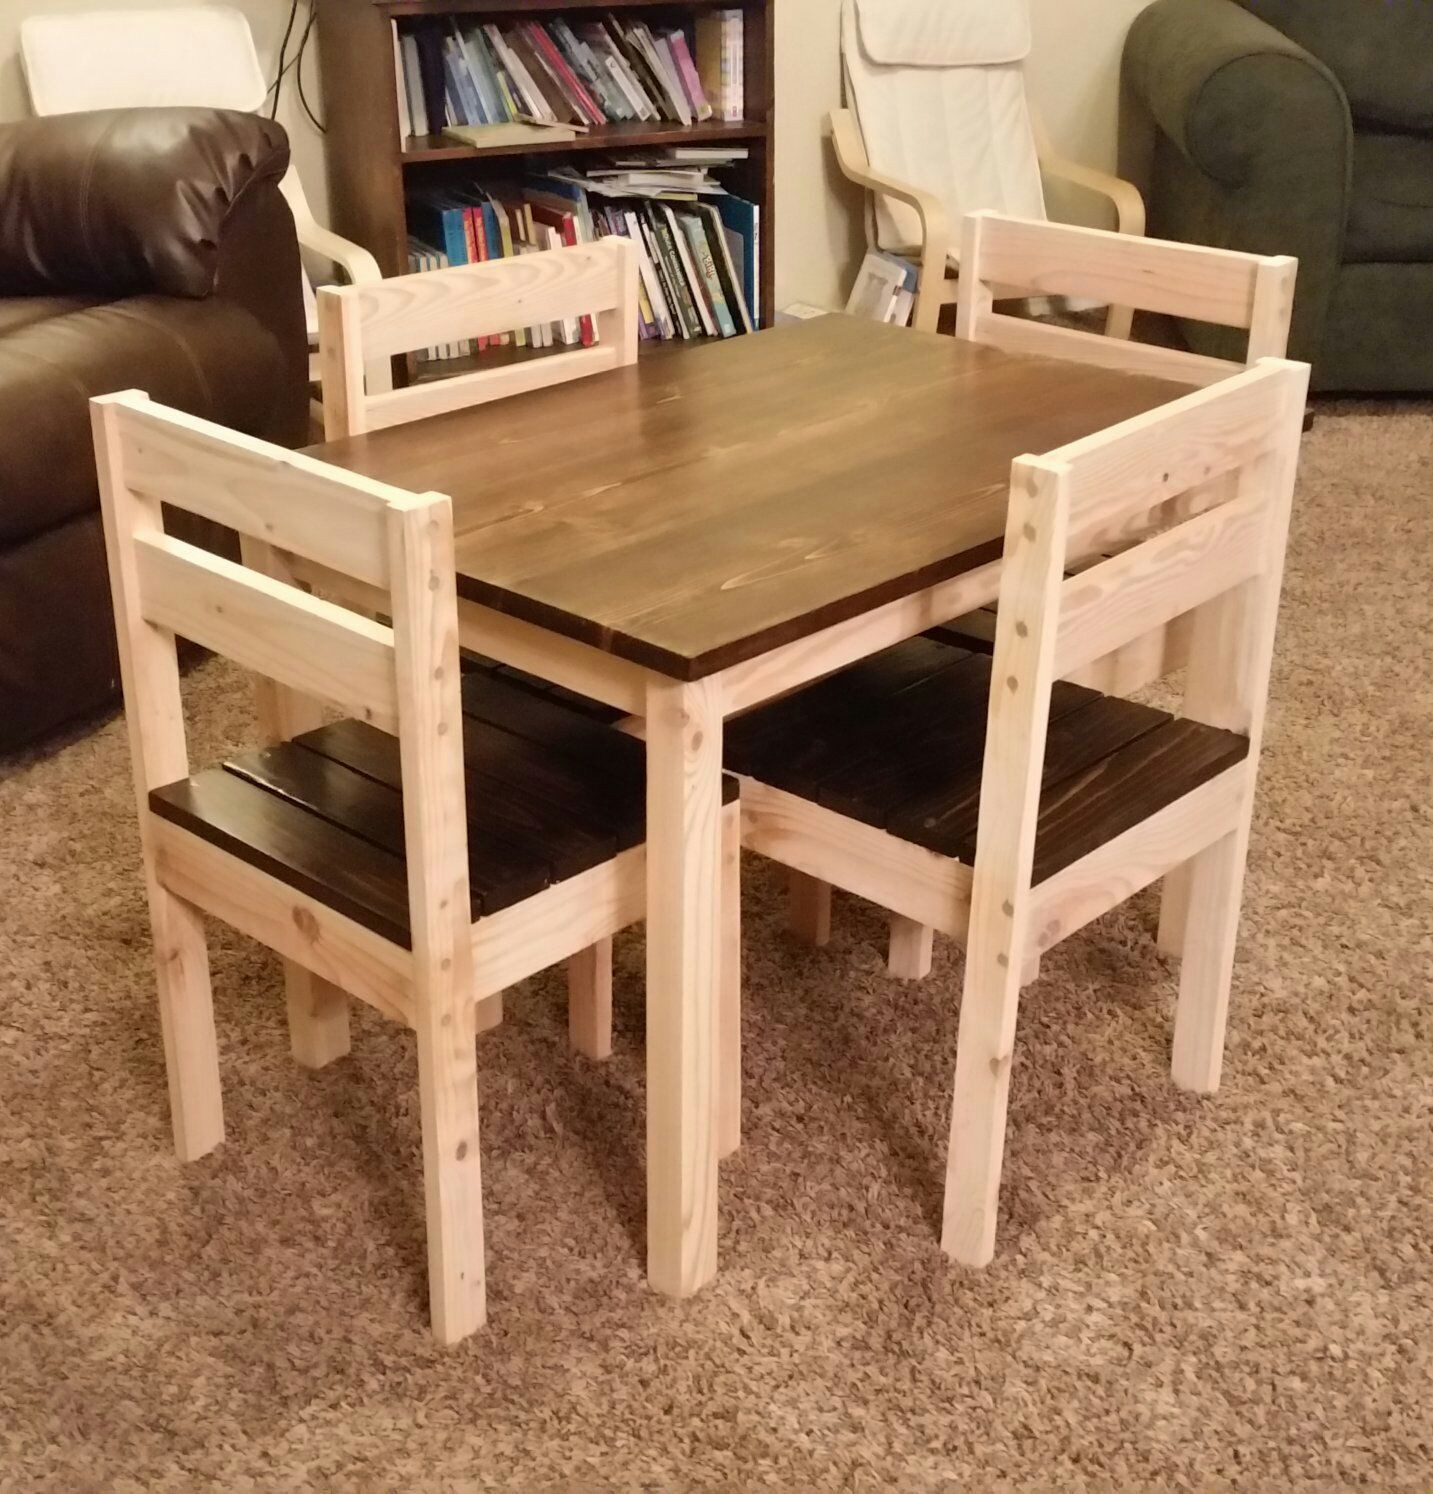 DIY Toddler Table And Chairs
 Kids table and chairs